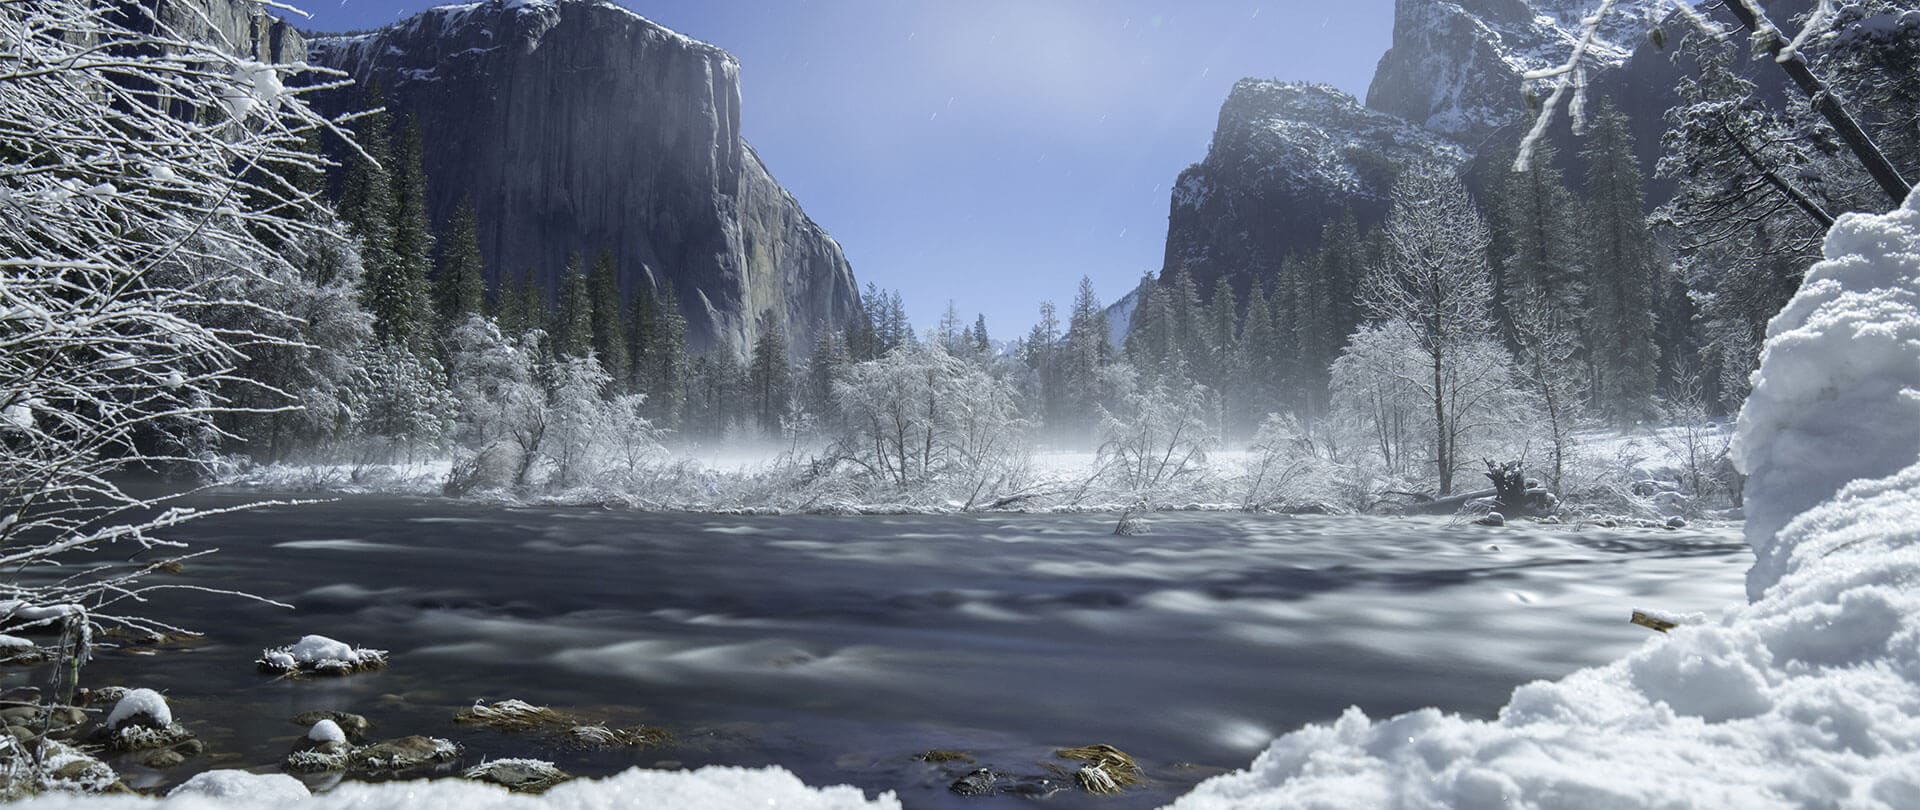 landscape image of yosemite valley covered in snow